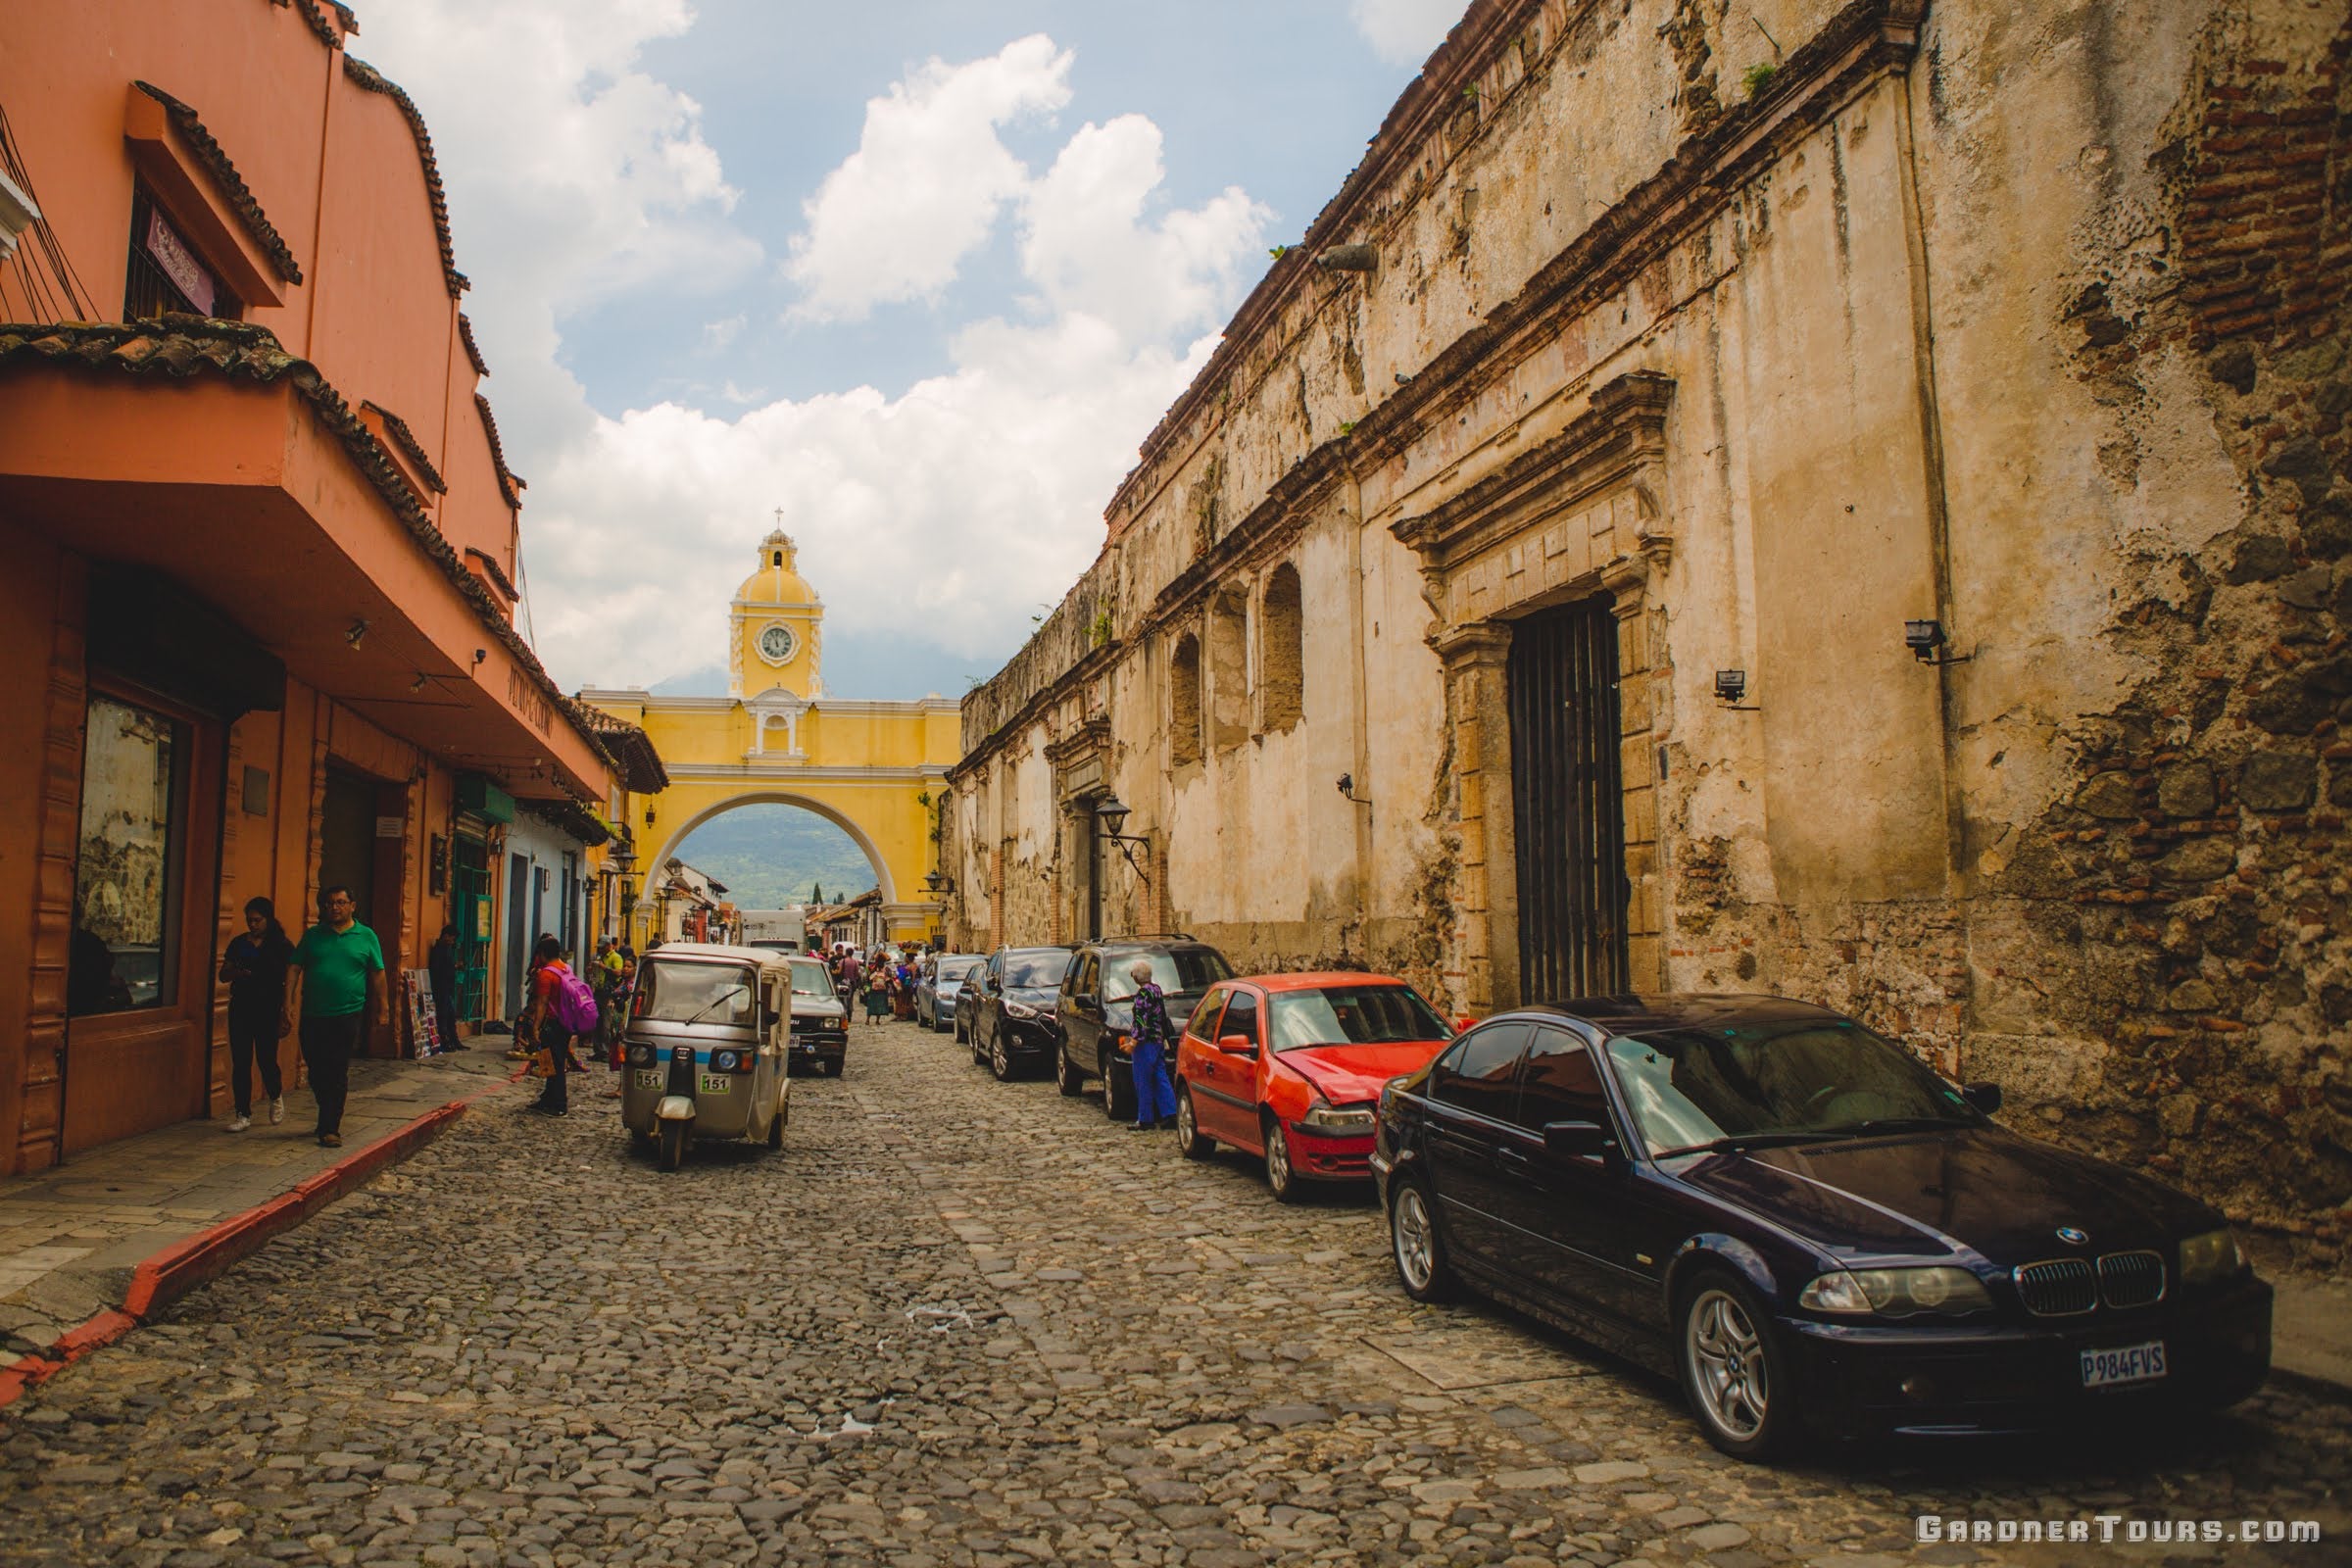 Street View of the yellow Arch in Antigua, Guatemala